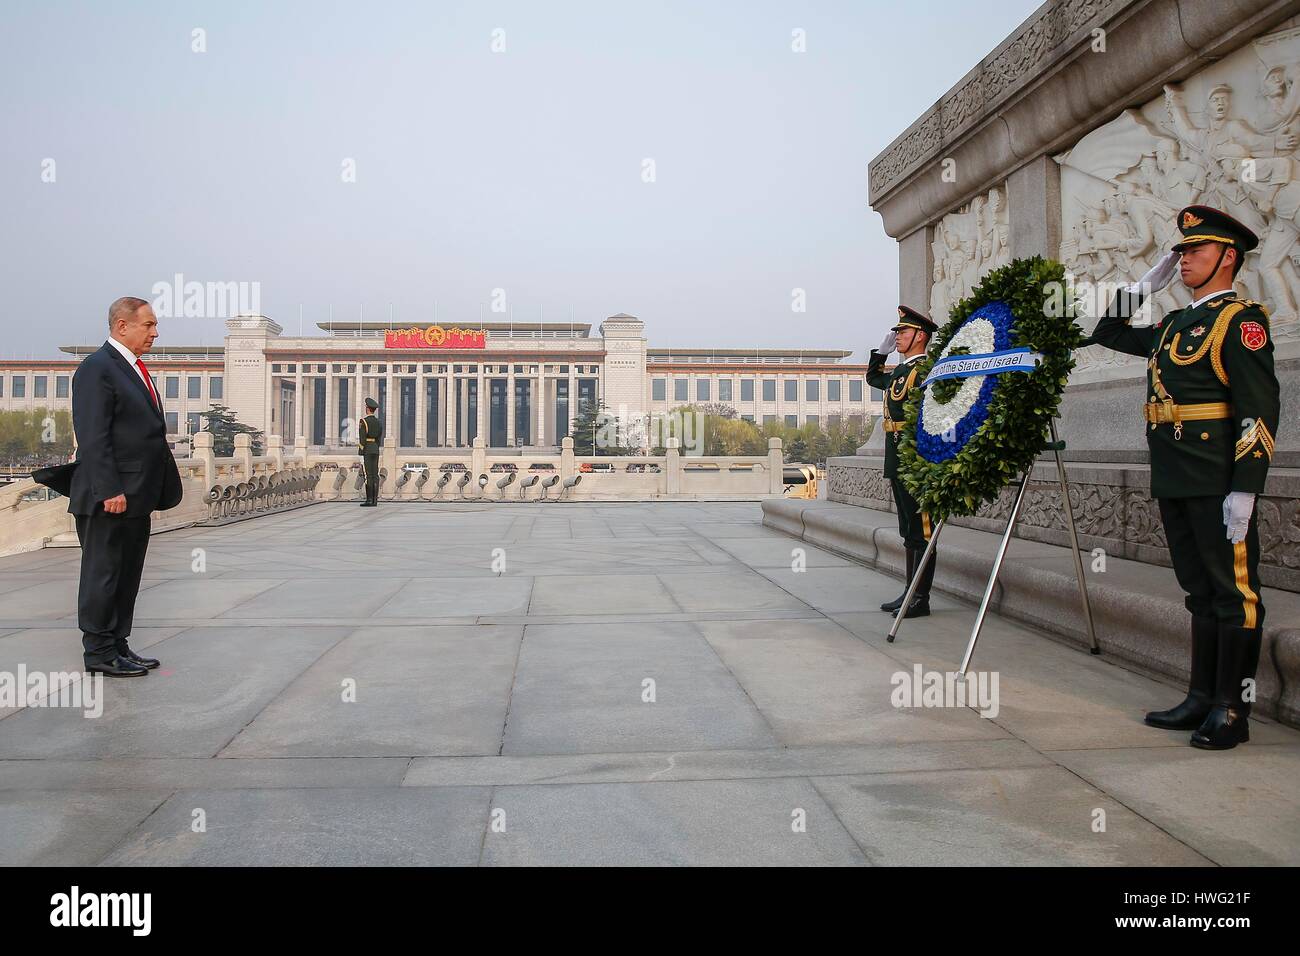 Beijing, China. 21st Mar, 2017. Israeli Prime Minister Benjamin Netanyahu presents a wreath to the Monument to the People's Heroes at the Tian'anmen Square in Beijing, capital of China, March 21, 2017. Credit: Cui Xinyu/Xinhua/Alamy Live News Stock Photo